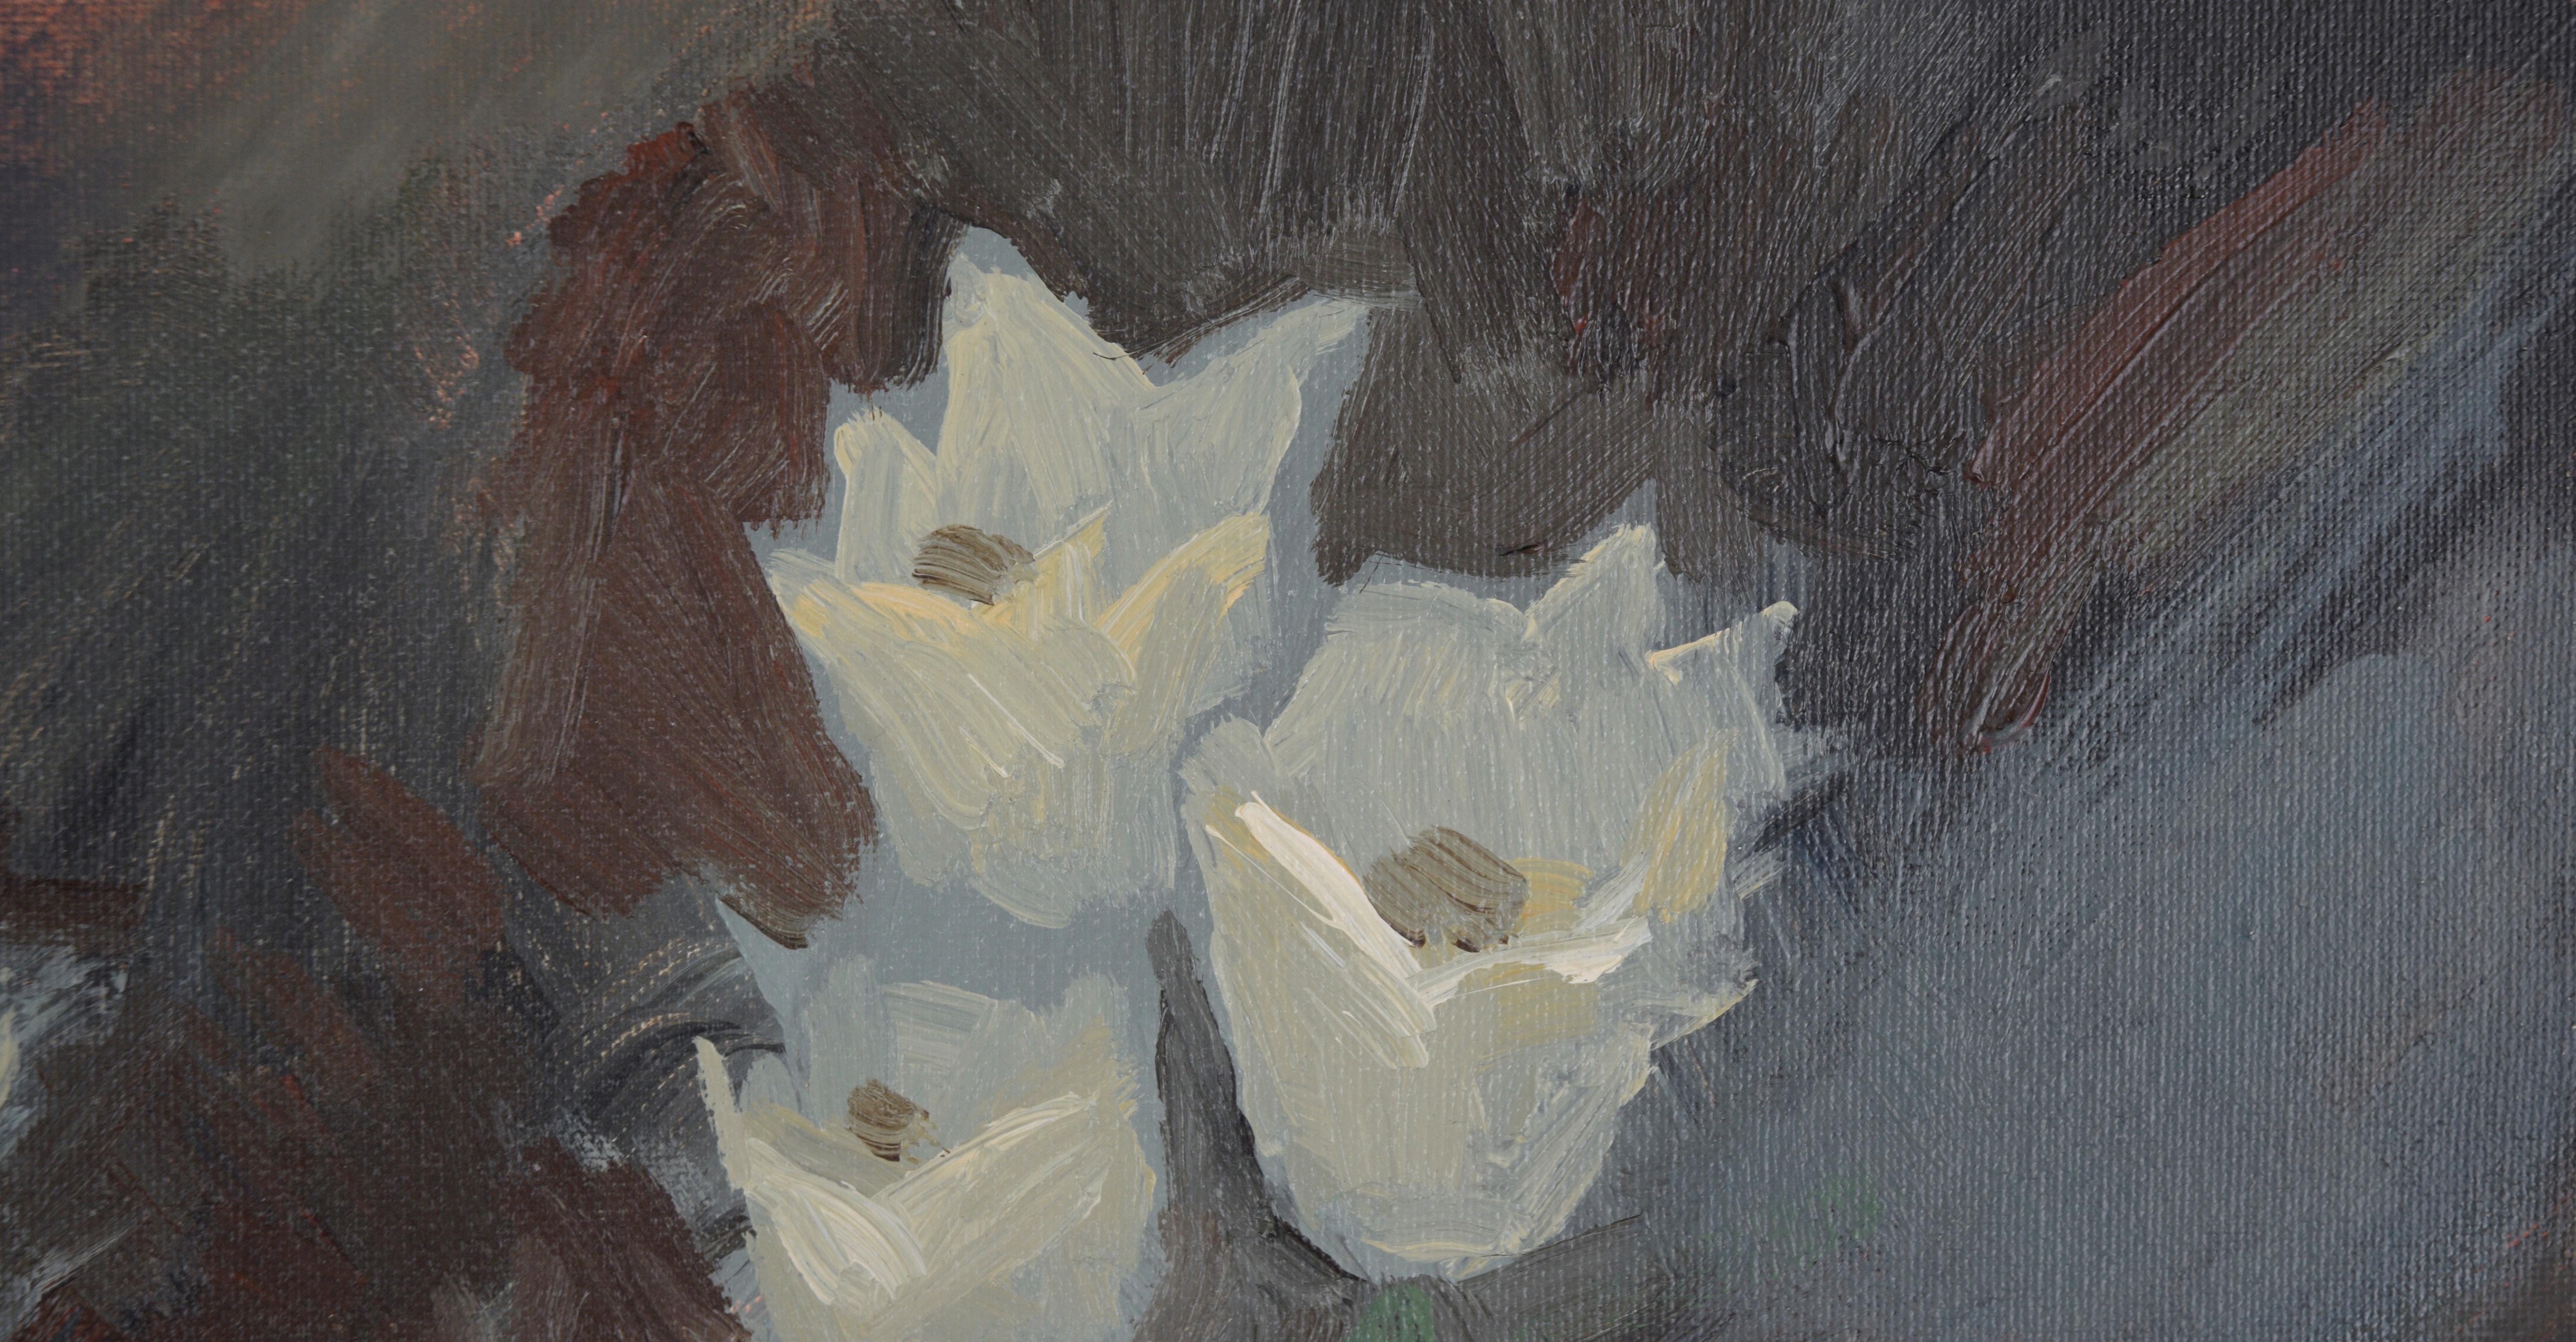 White Tulips at Night in Oil on Canvas - Contemporary Painting by Rod Norman